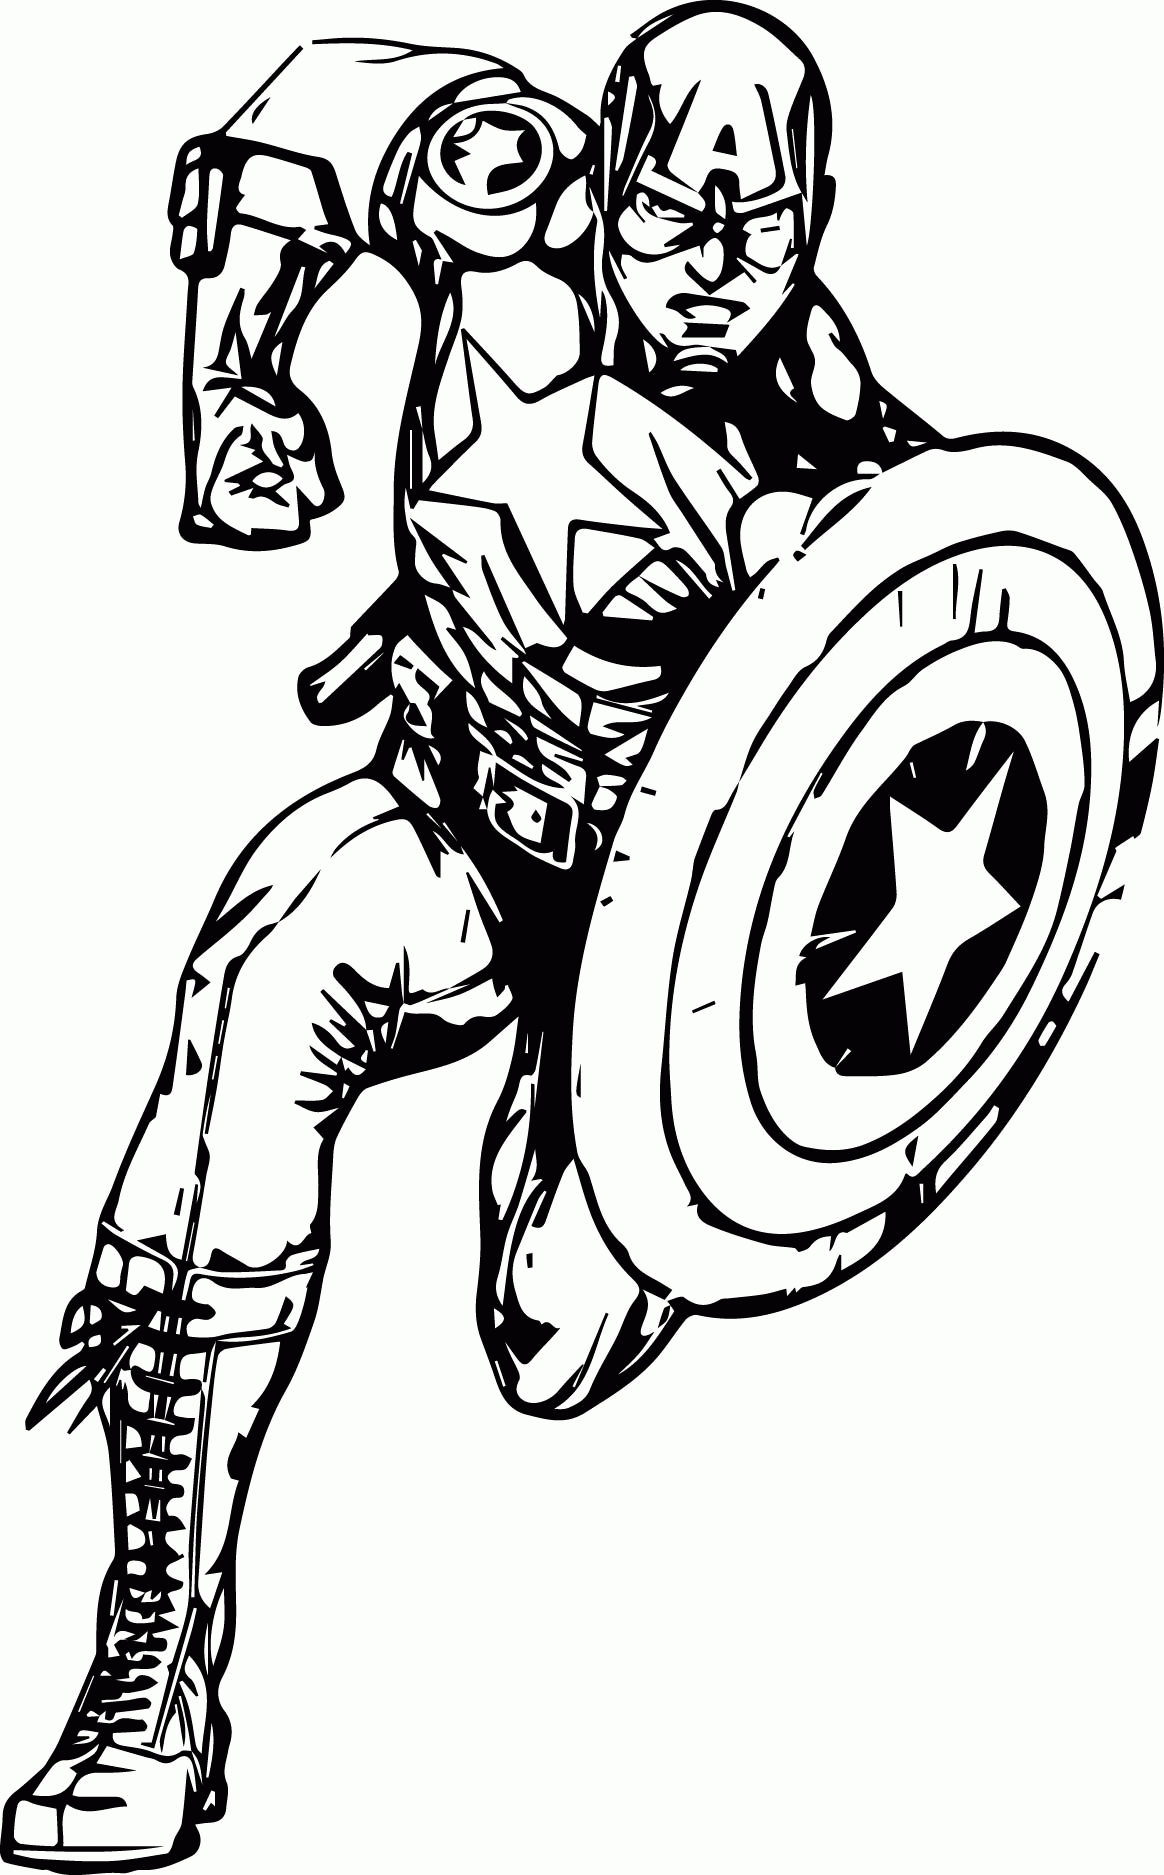 avengers coloring pages to print craftoholic ultimate avengers coloring pages avengers to print coloring pages 